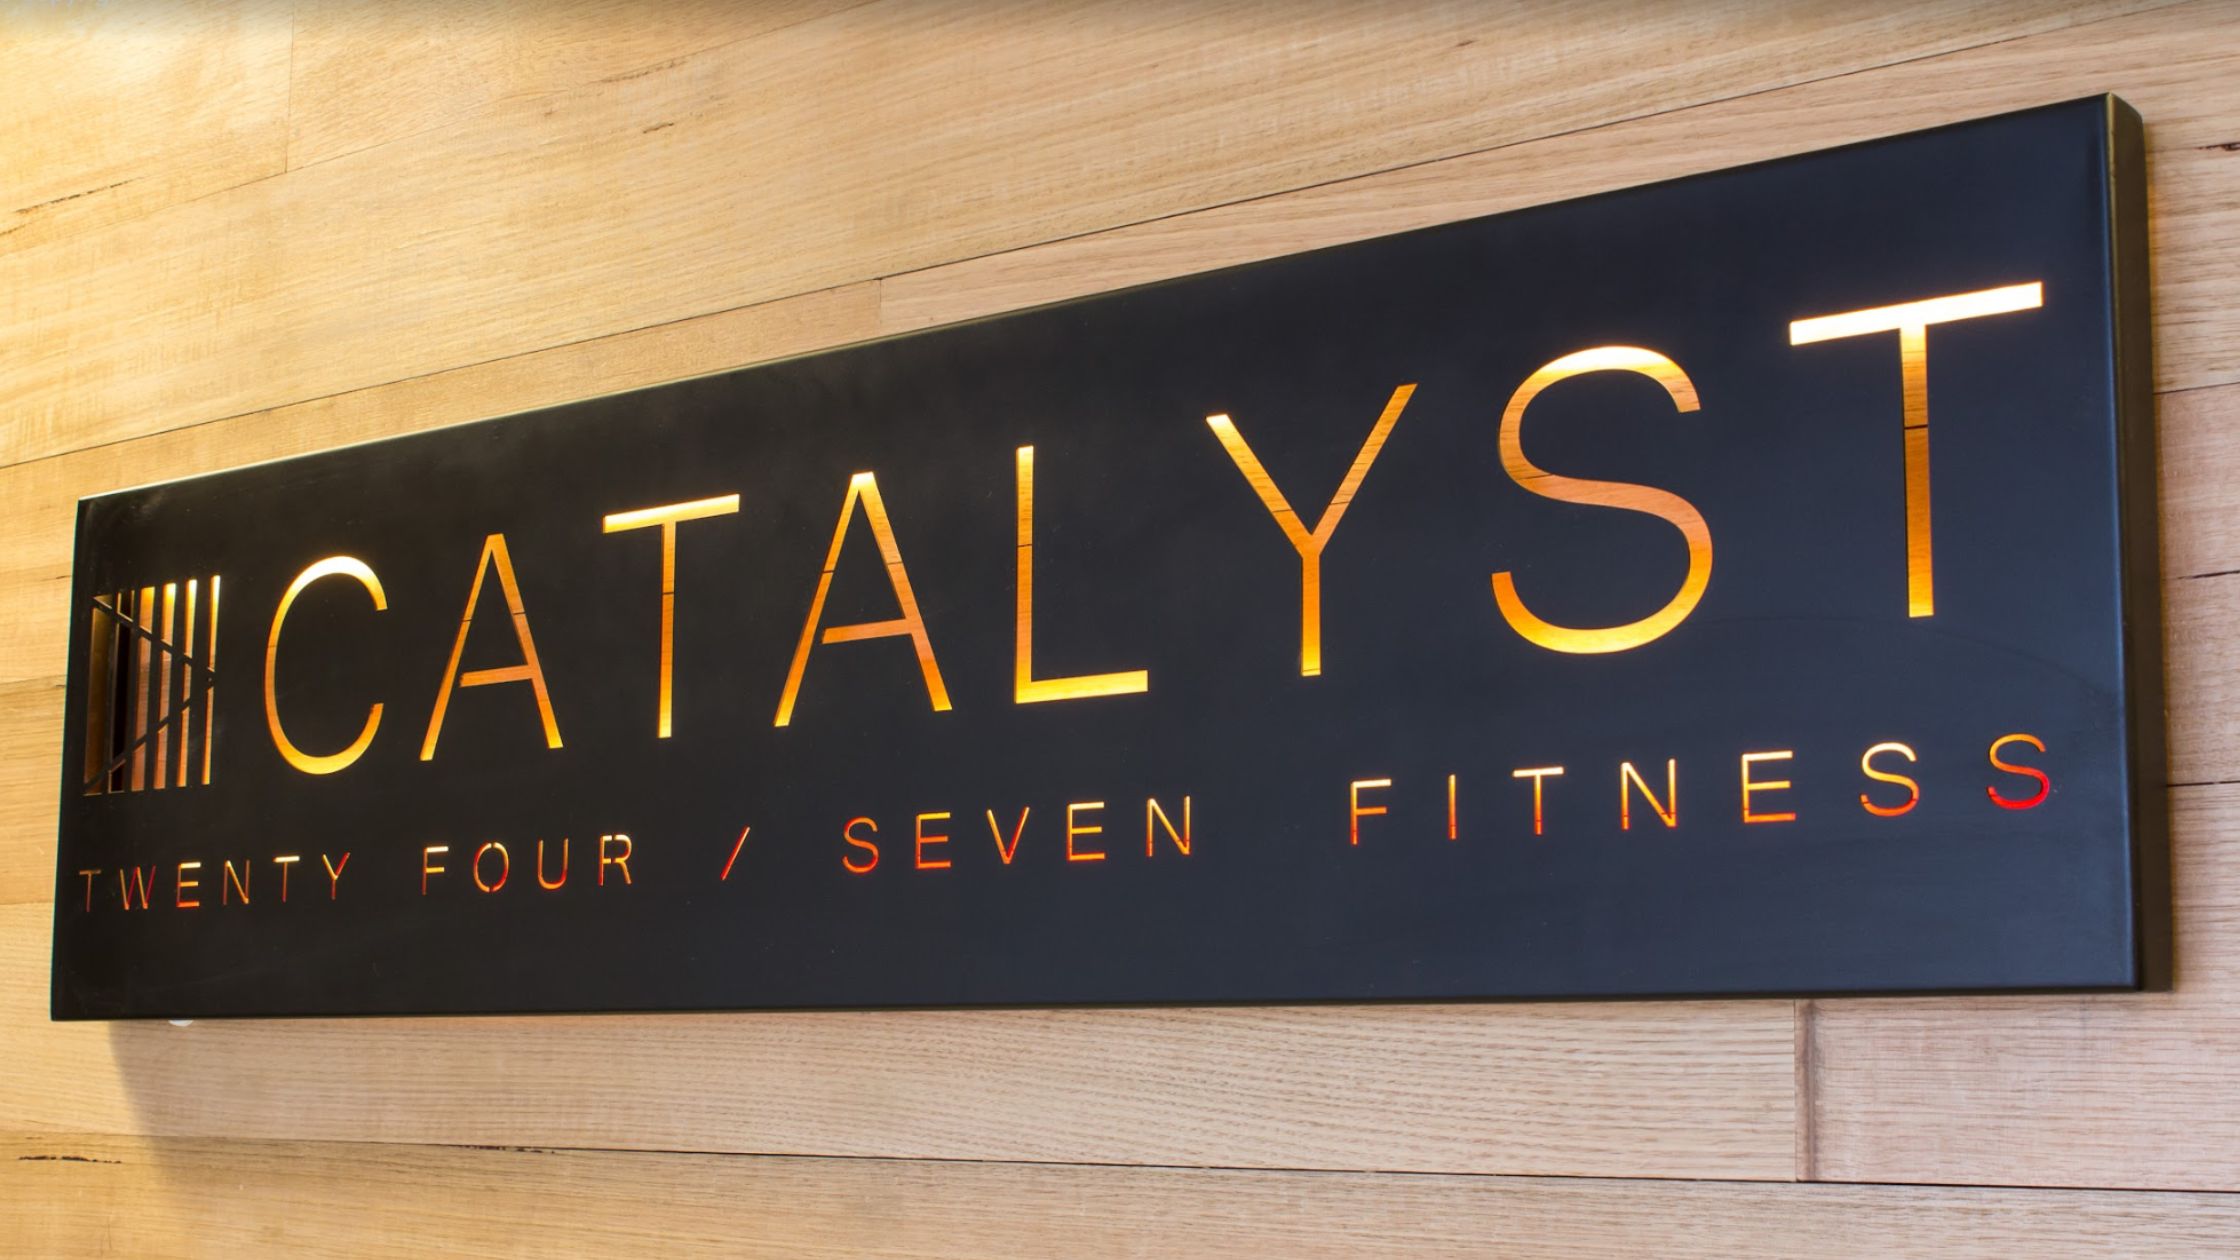 Catalyst 24/7 Fitness Sign